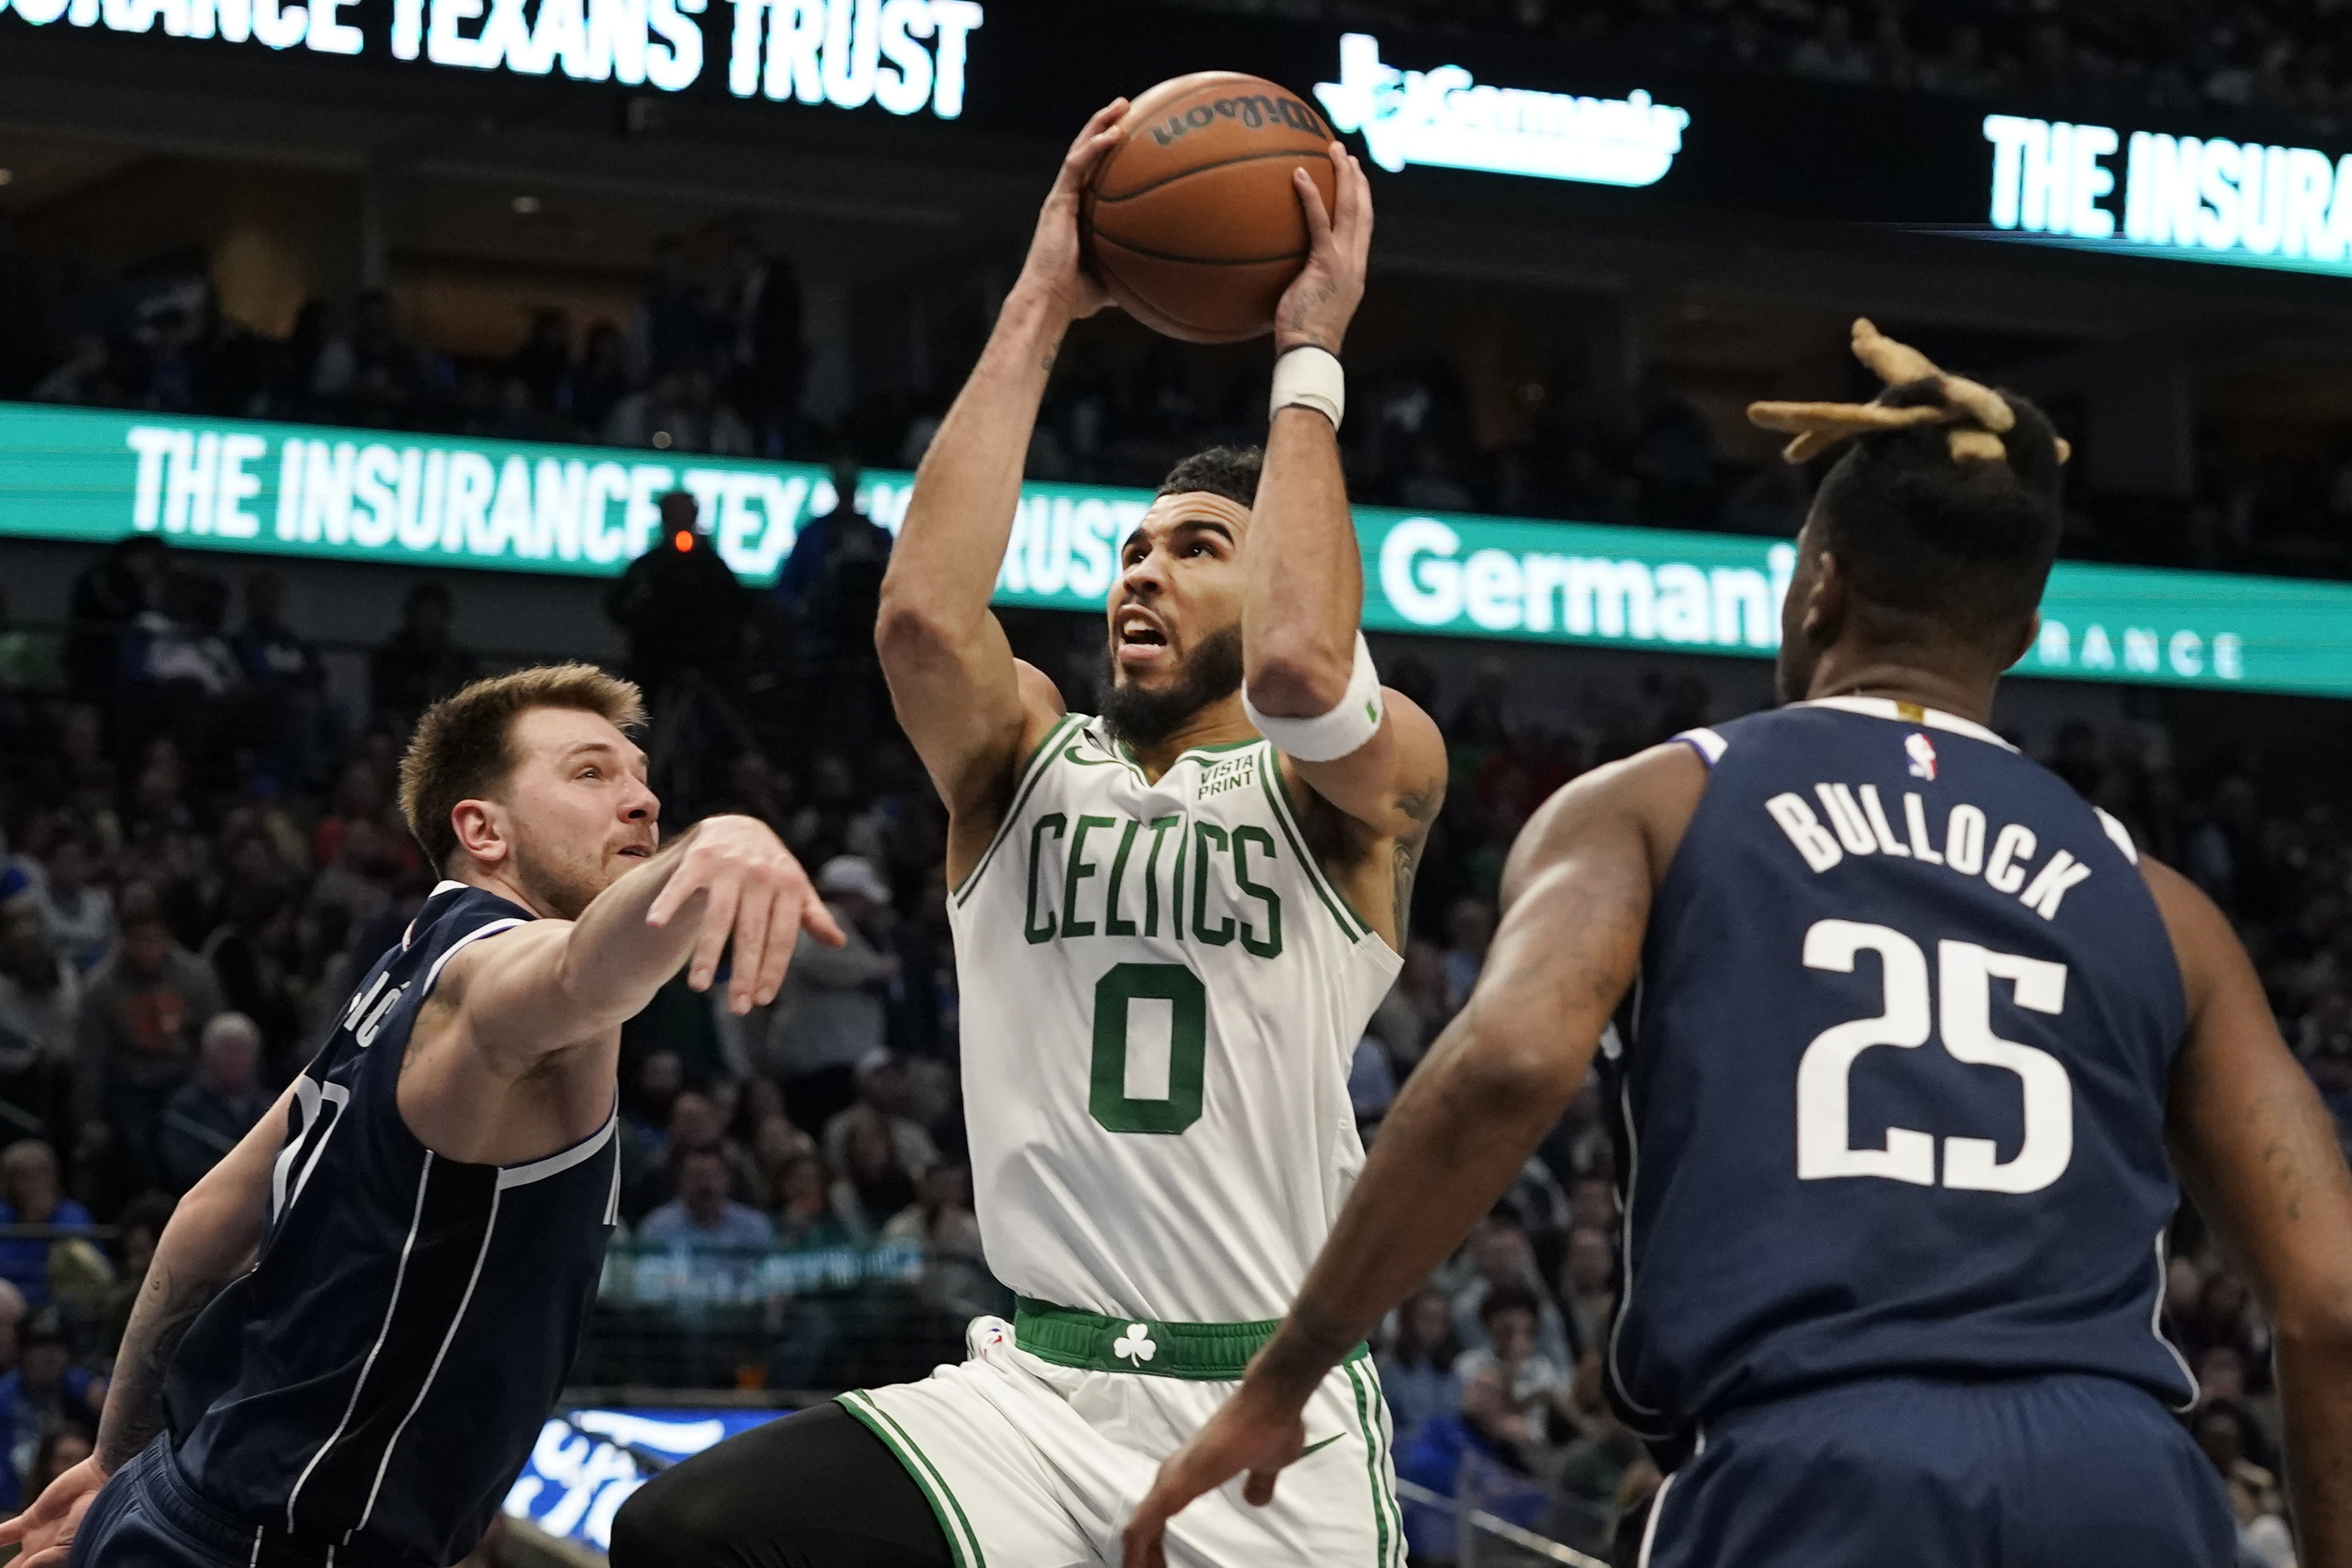 It was another showdown among stars, and the Celtics dominated